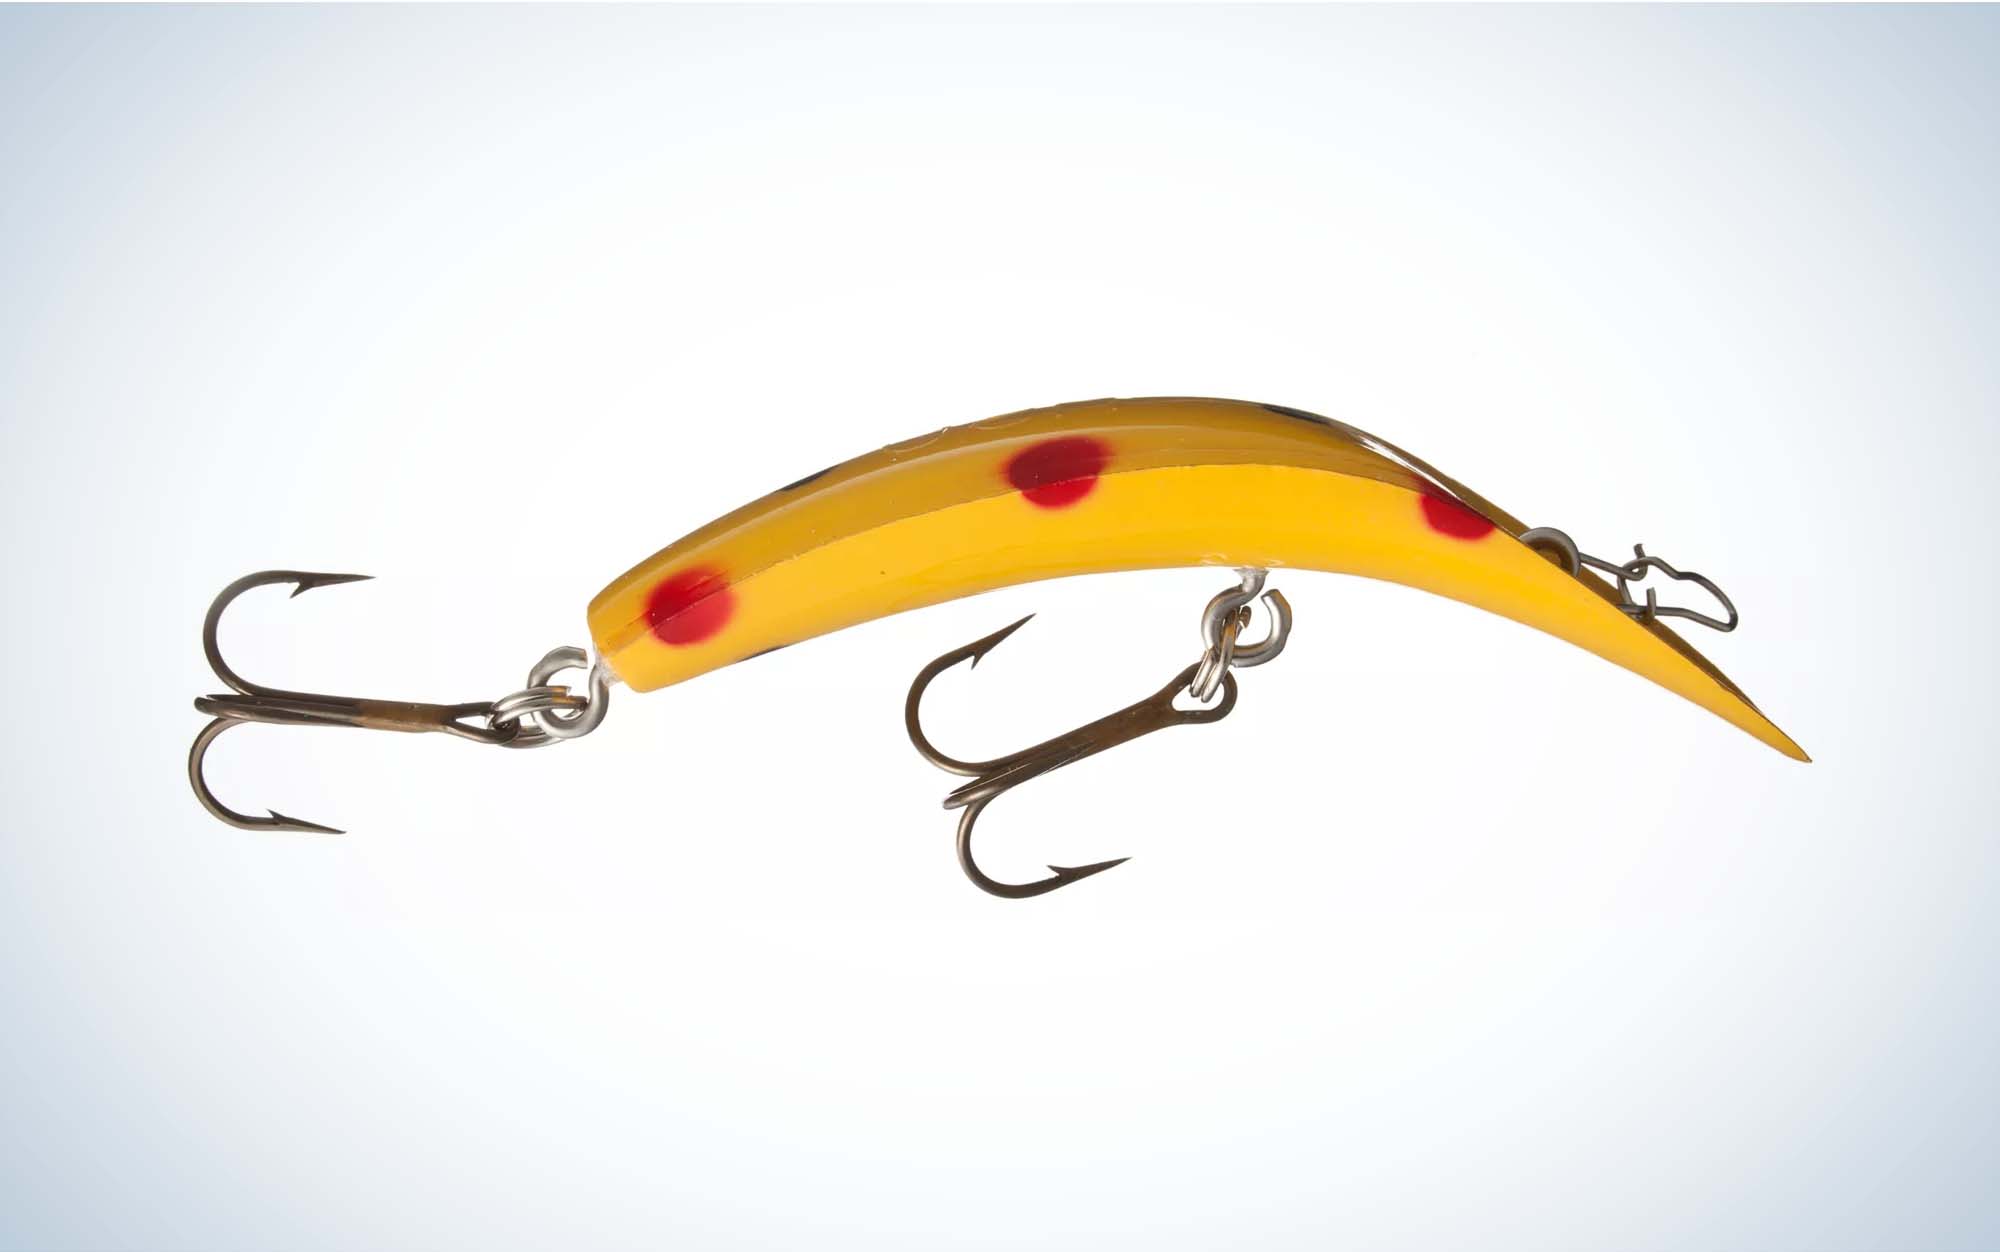 Pike Fishing Attracts Pike Effectively Must-have For Fishing Enthusiasts  Precise Swimming Movements Multi-jointed Bait Swimbait